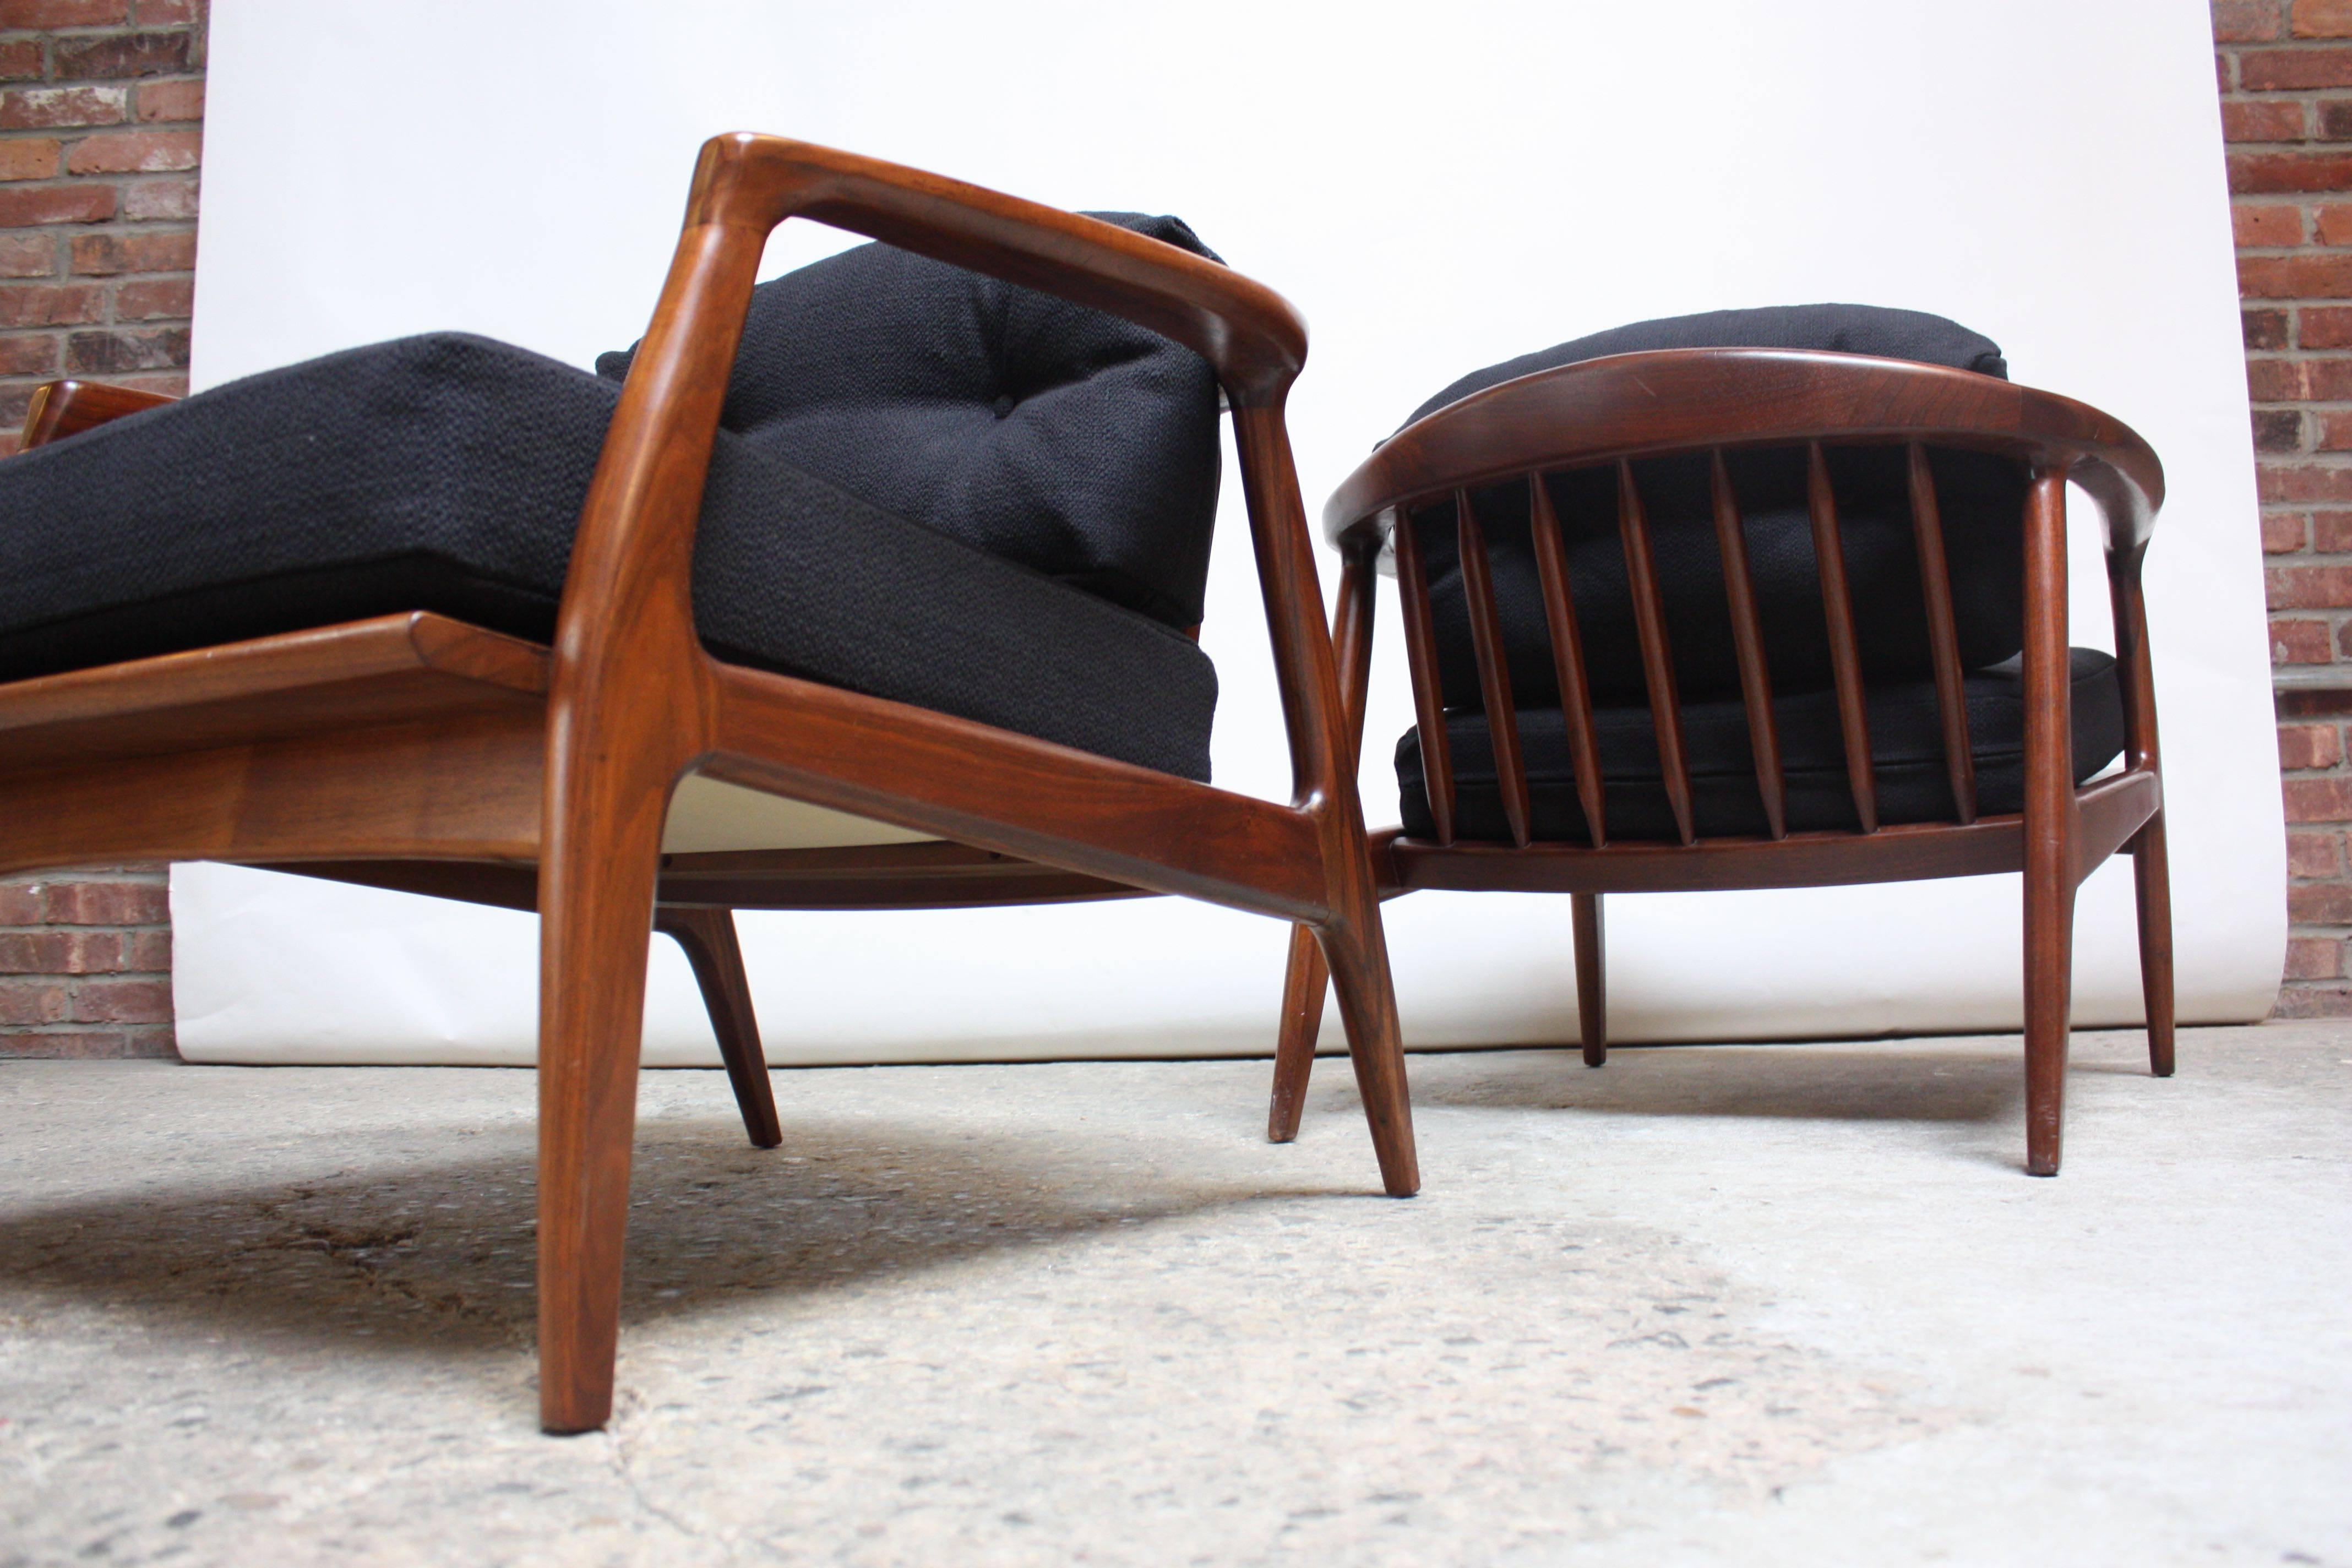 Pair of Sculptural Walnut Lounge Chairs by Milo Baughman for Thayer Coggin 1